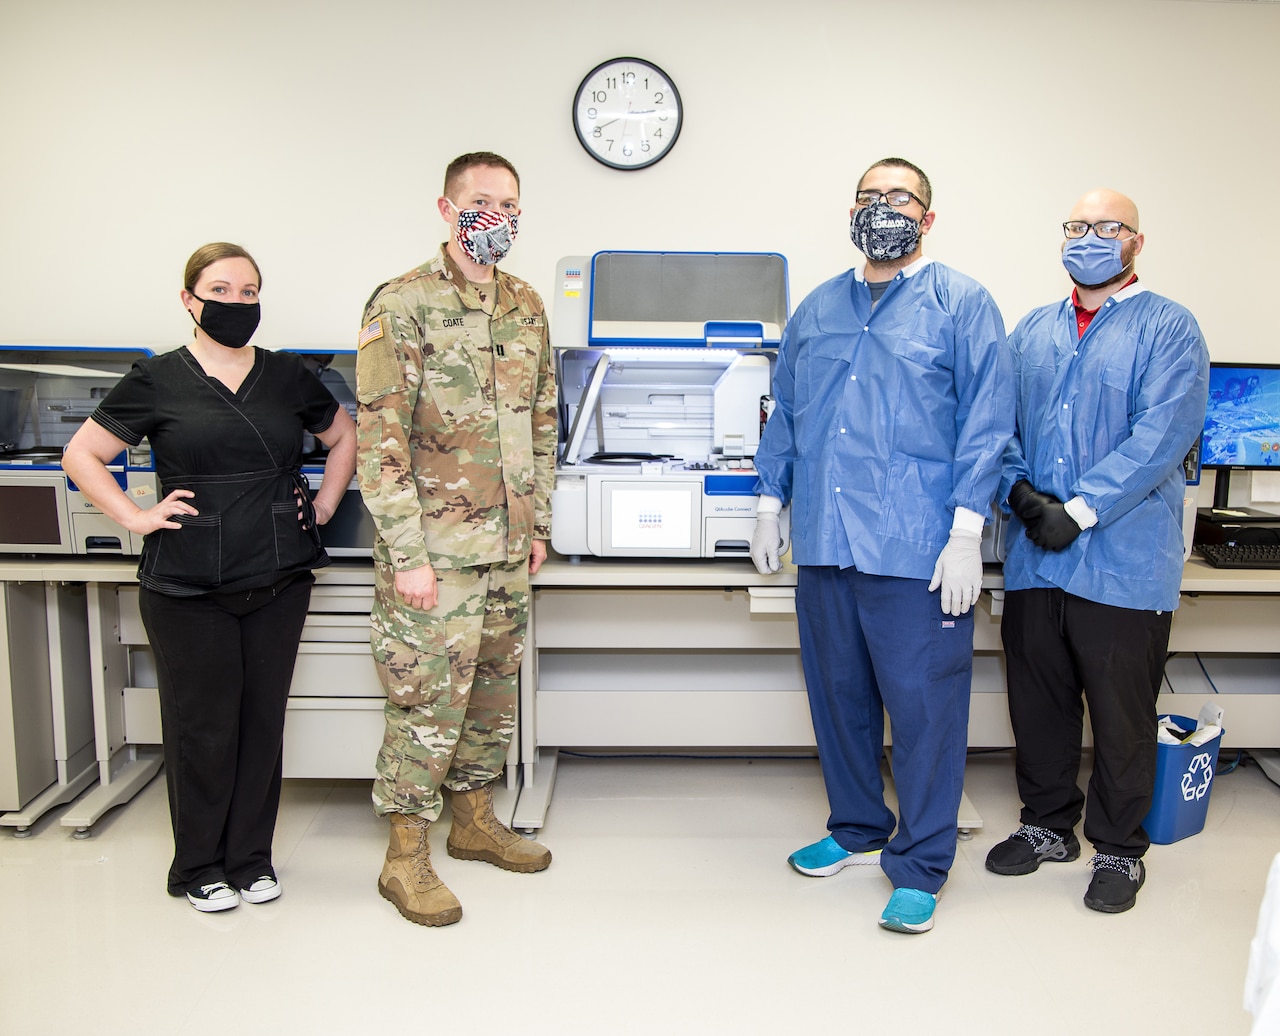 Molecular team members at Brooke Army Medical Center demonstrate molecular ribonucleic acid extraction equipment.